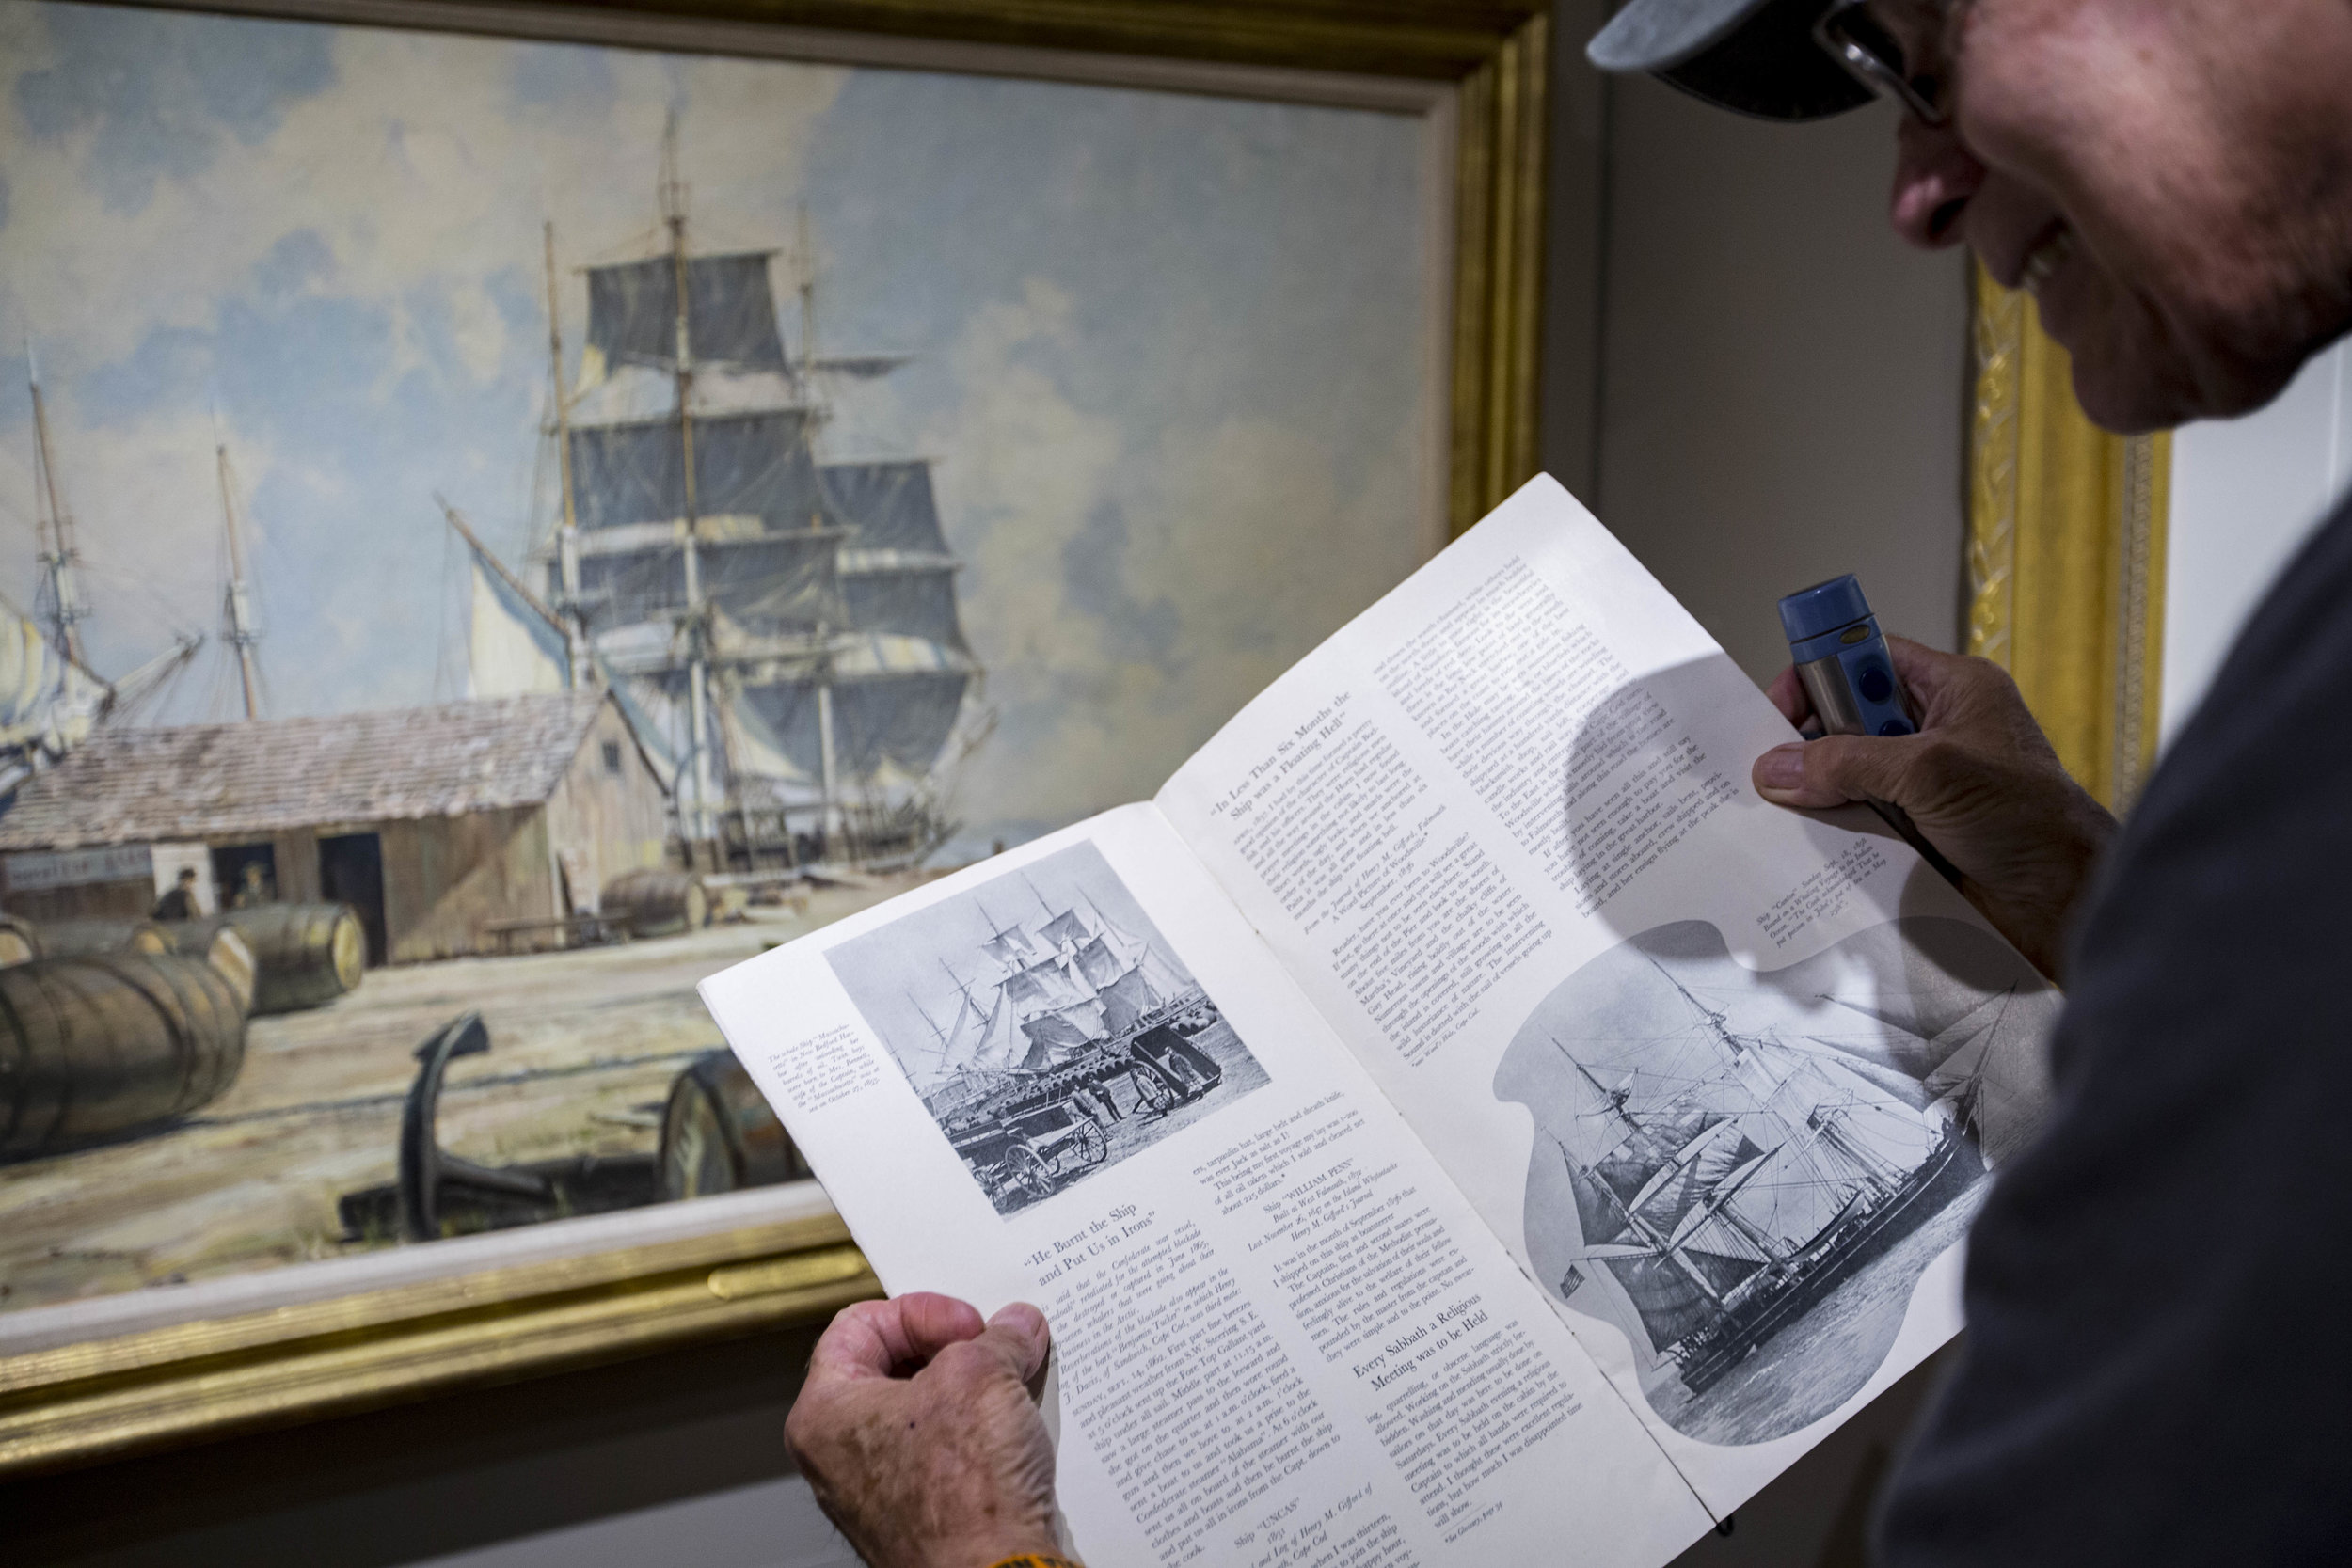  Don Stucke, the Maritime Museum curator, compares a photograph in a 1936 Cape Cod Chamber of Commerce publication to a painting in the museum. Karl Hoffman found the publication while looking for records of his grandfather's restaurant on the Cape. 